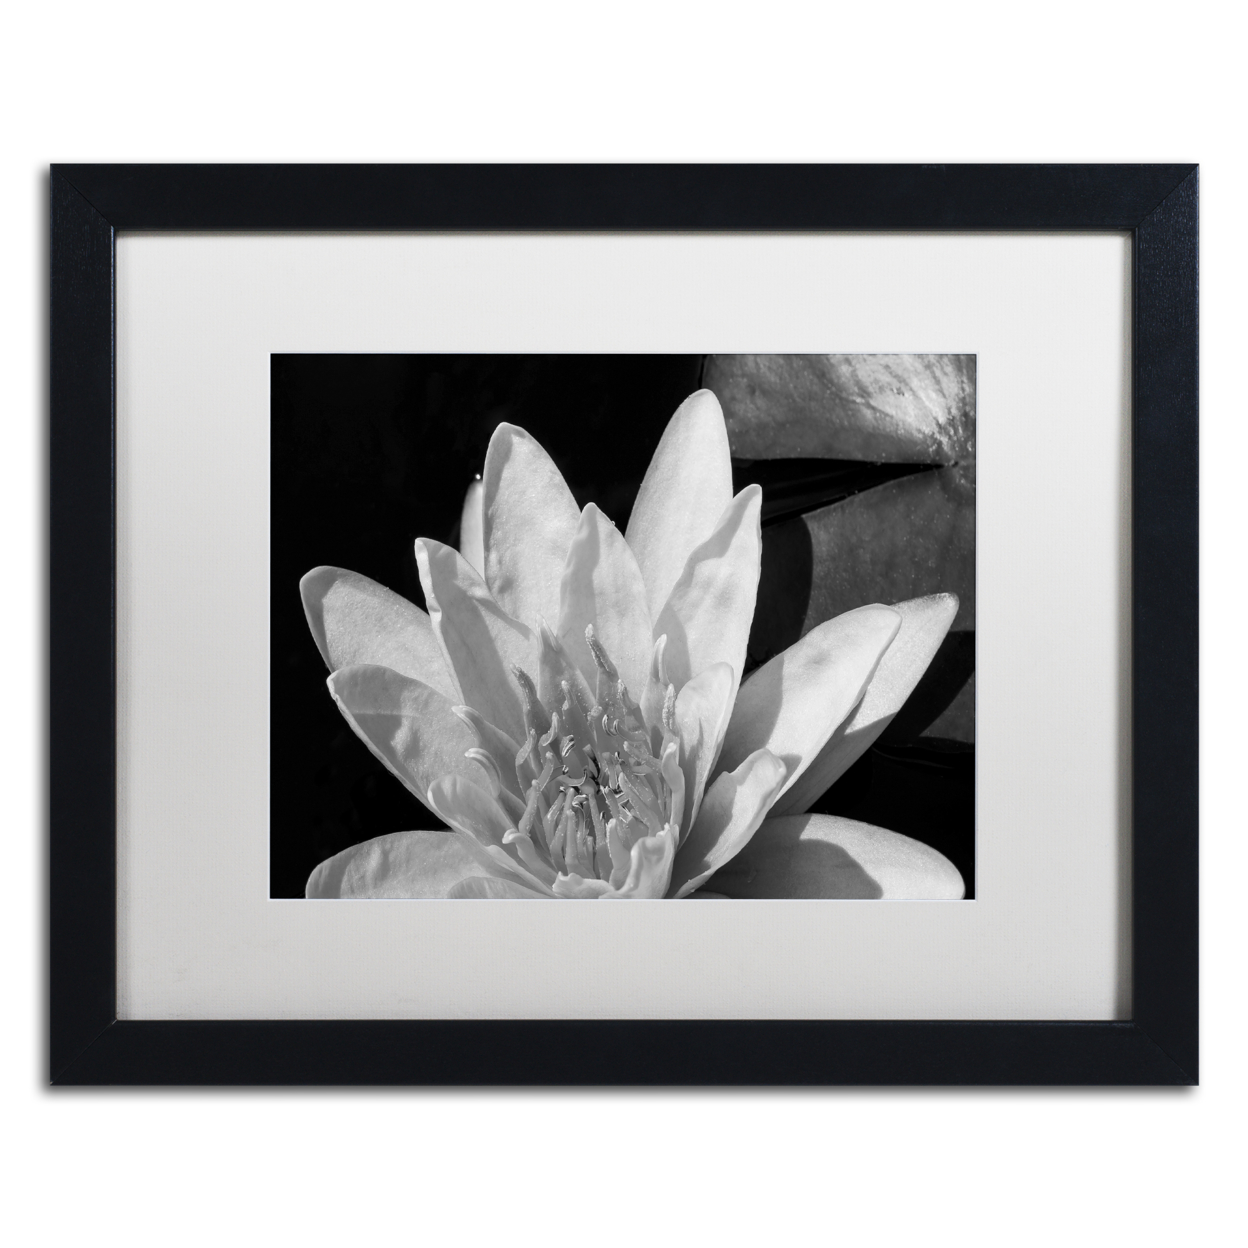 Kurt Shaffer 'Water Lily In Black And White' Black Wooden Framed Art 18 X 22 Inches